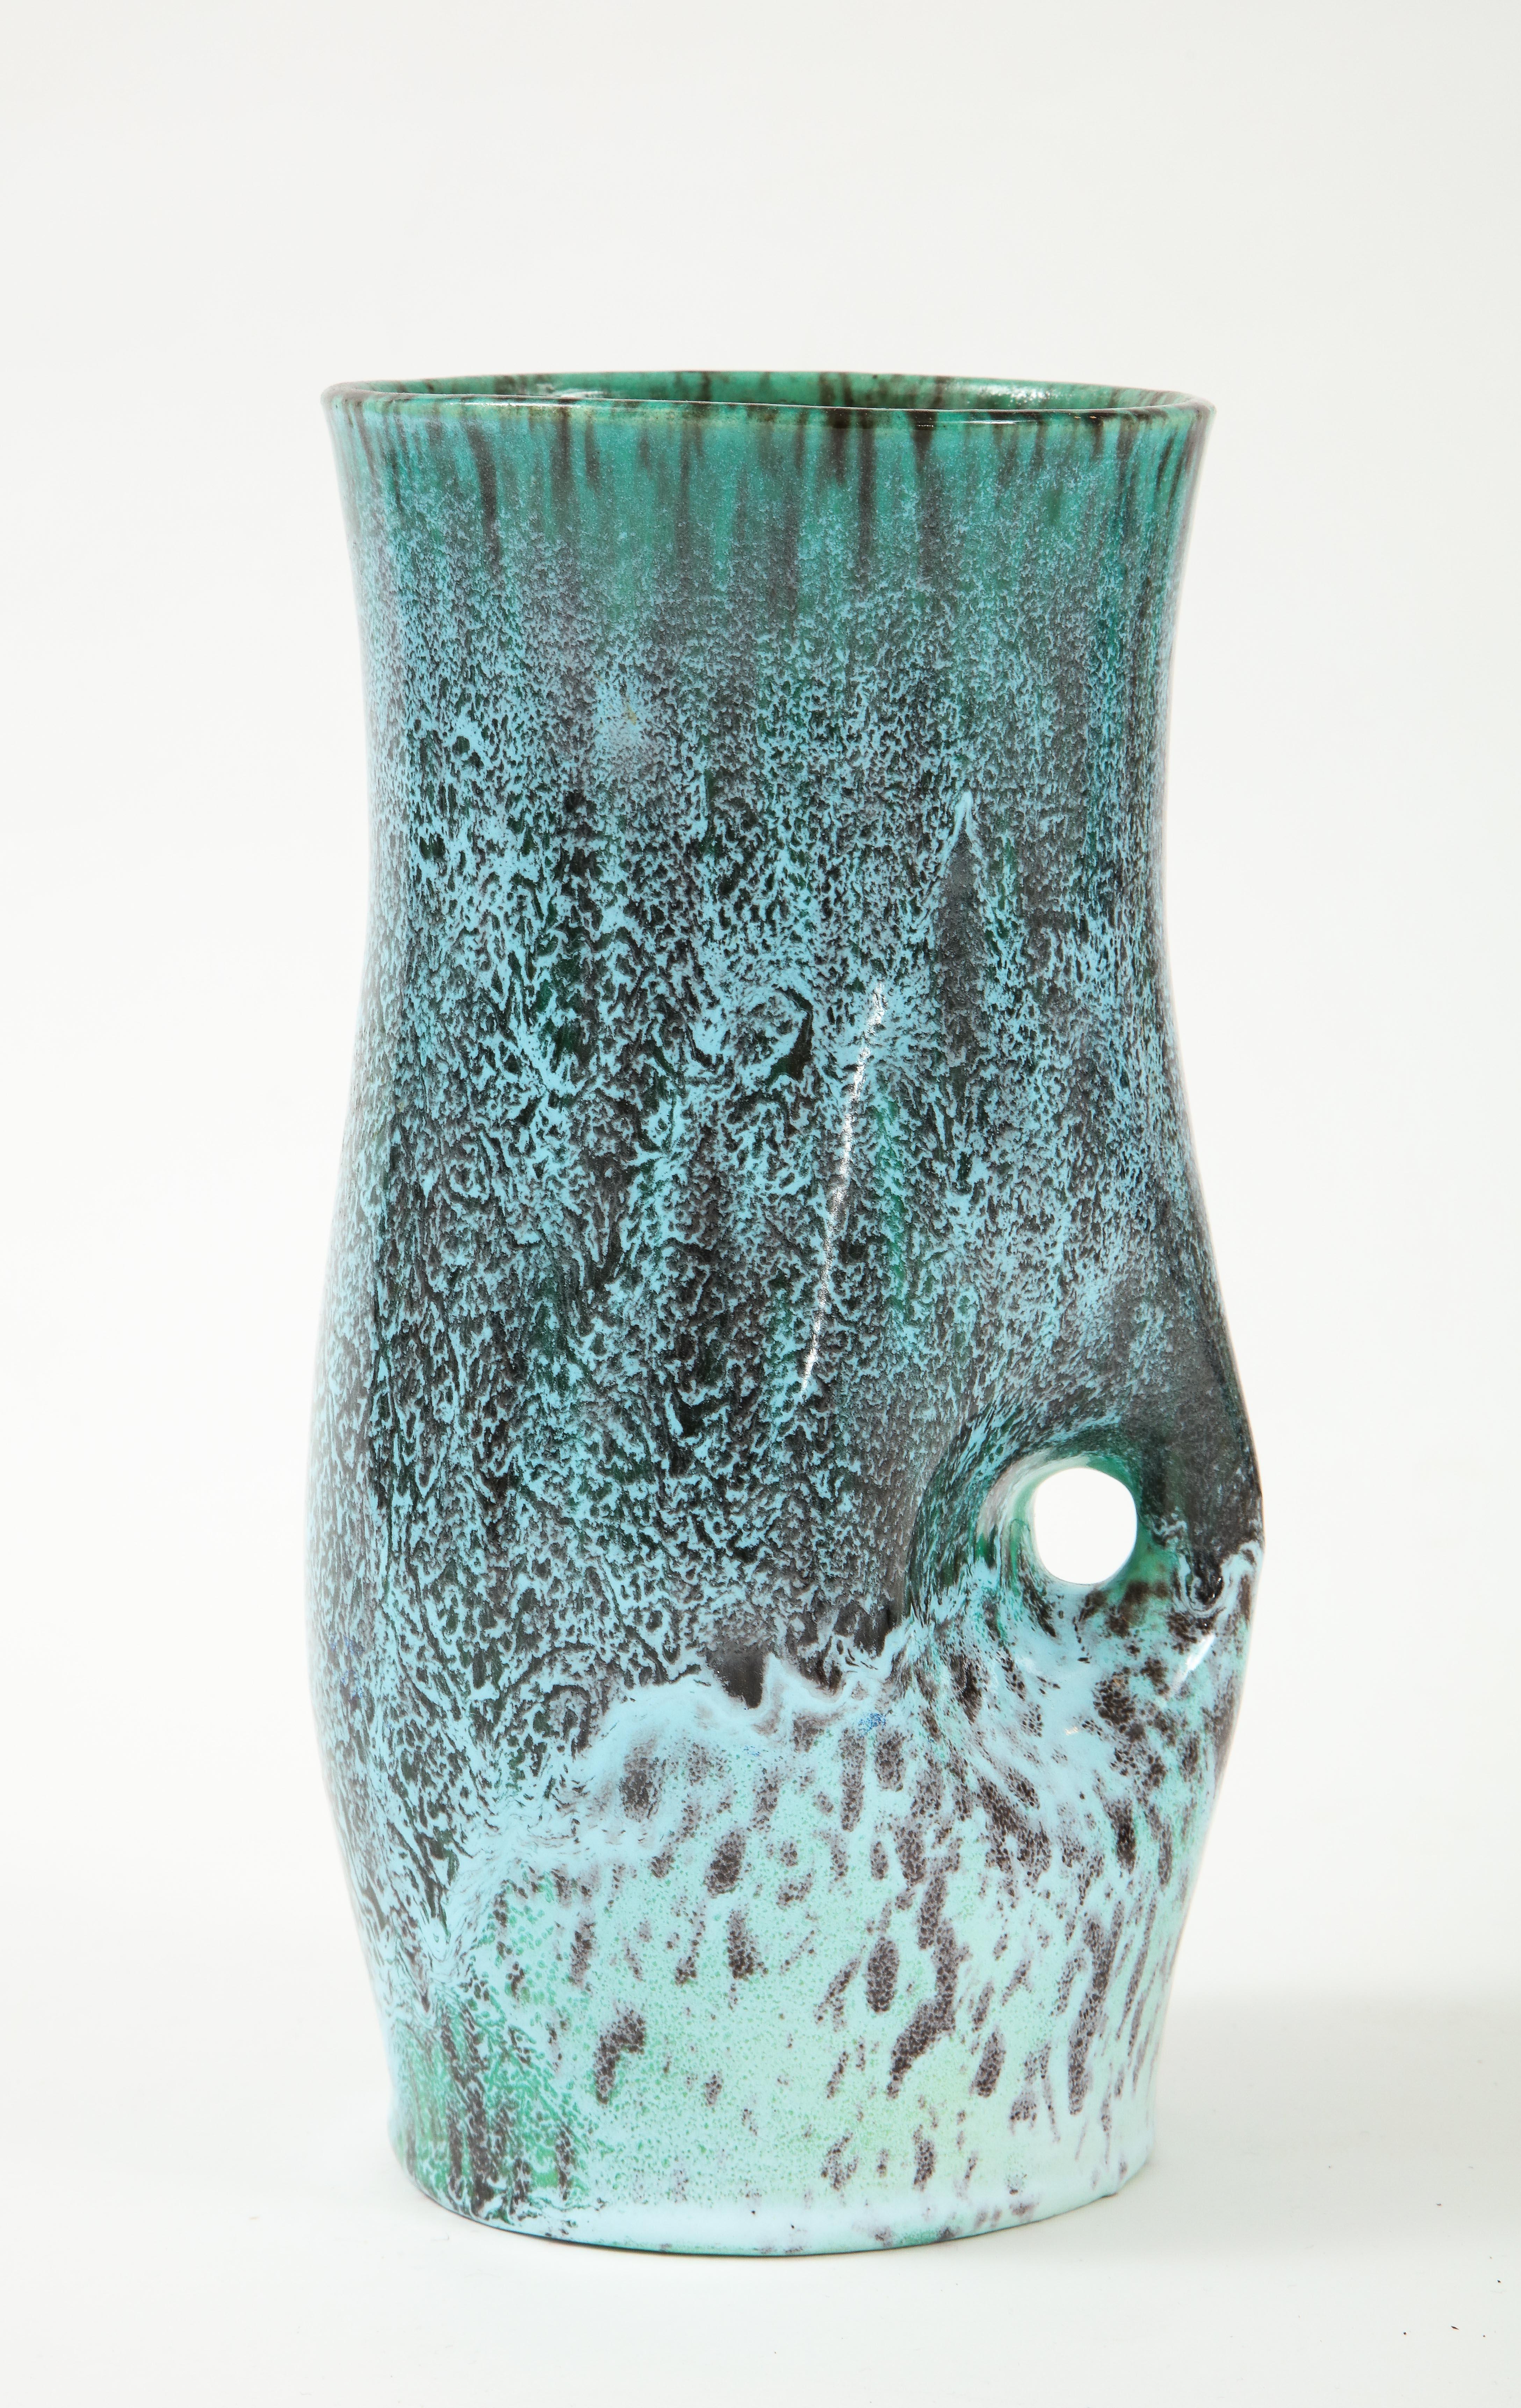 A unique vase produced by Accolay Pottery in France. One of many pieces of Accolay in our inventory, we love this accent piece for its form and beautiful glaze.